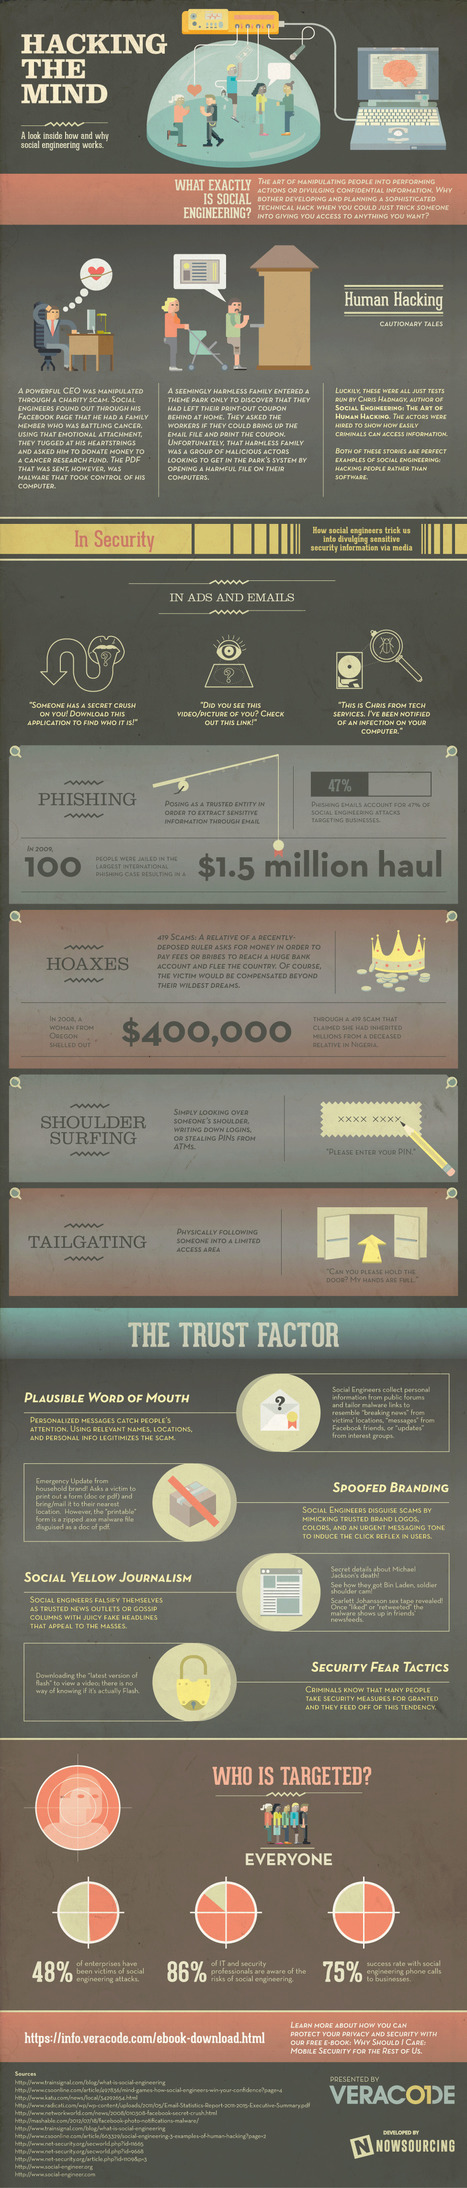 Hacking the Mind: How & Why Social Engineering Works [Infographic] | Web 2.0 for juandoming | Scoop.it